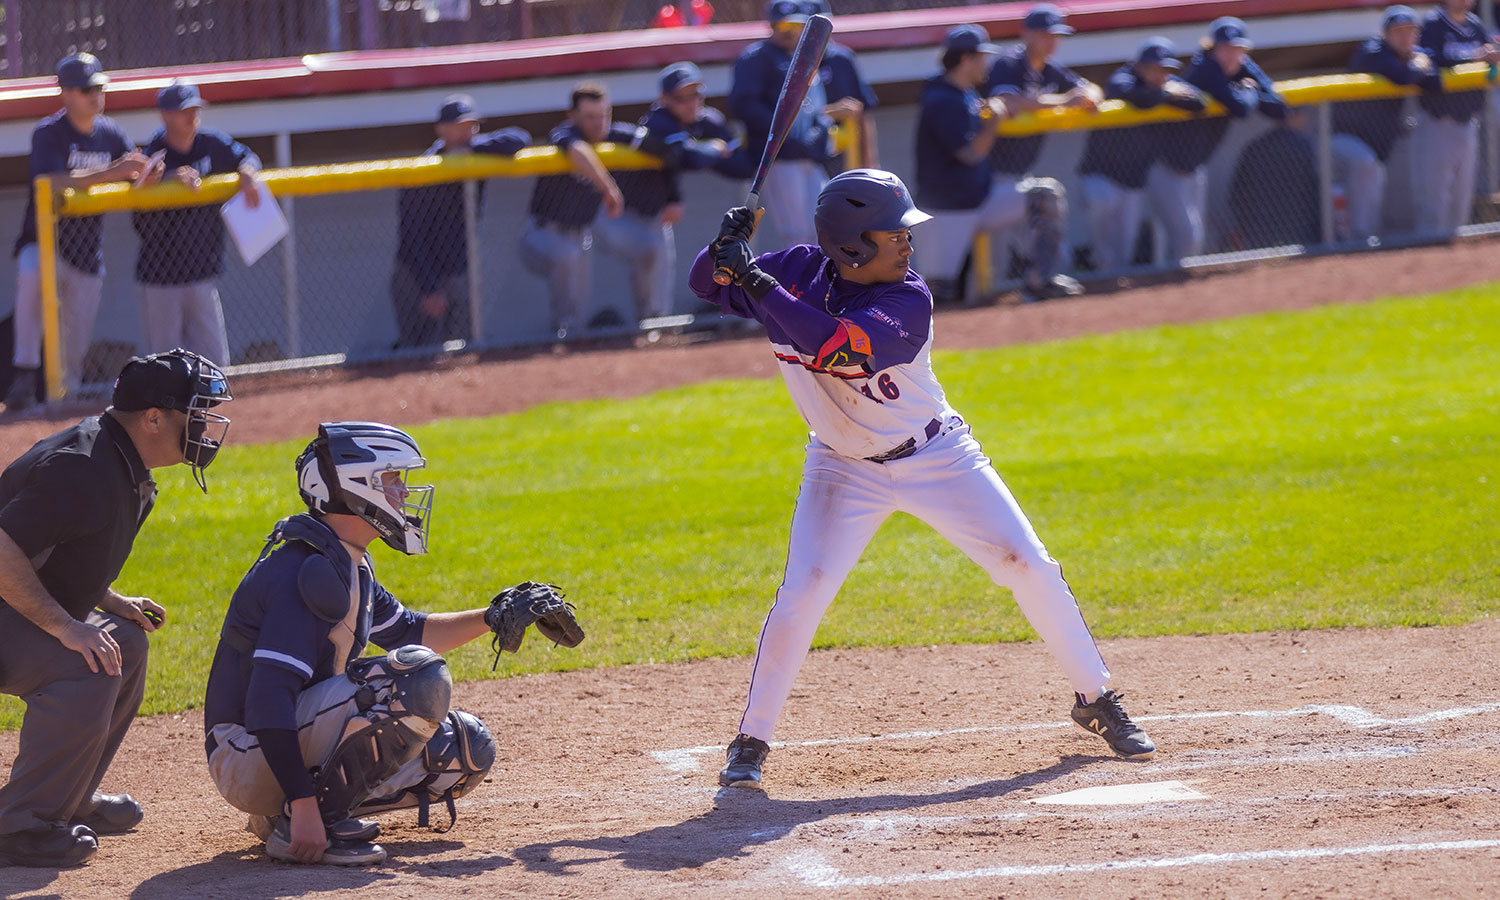 Jeremy Sanchez ’26 awaits a pitch during the first game of a doubleheader between Hobart and Ithaca.